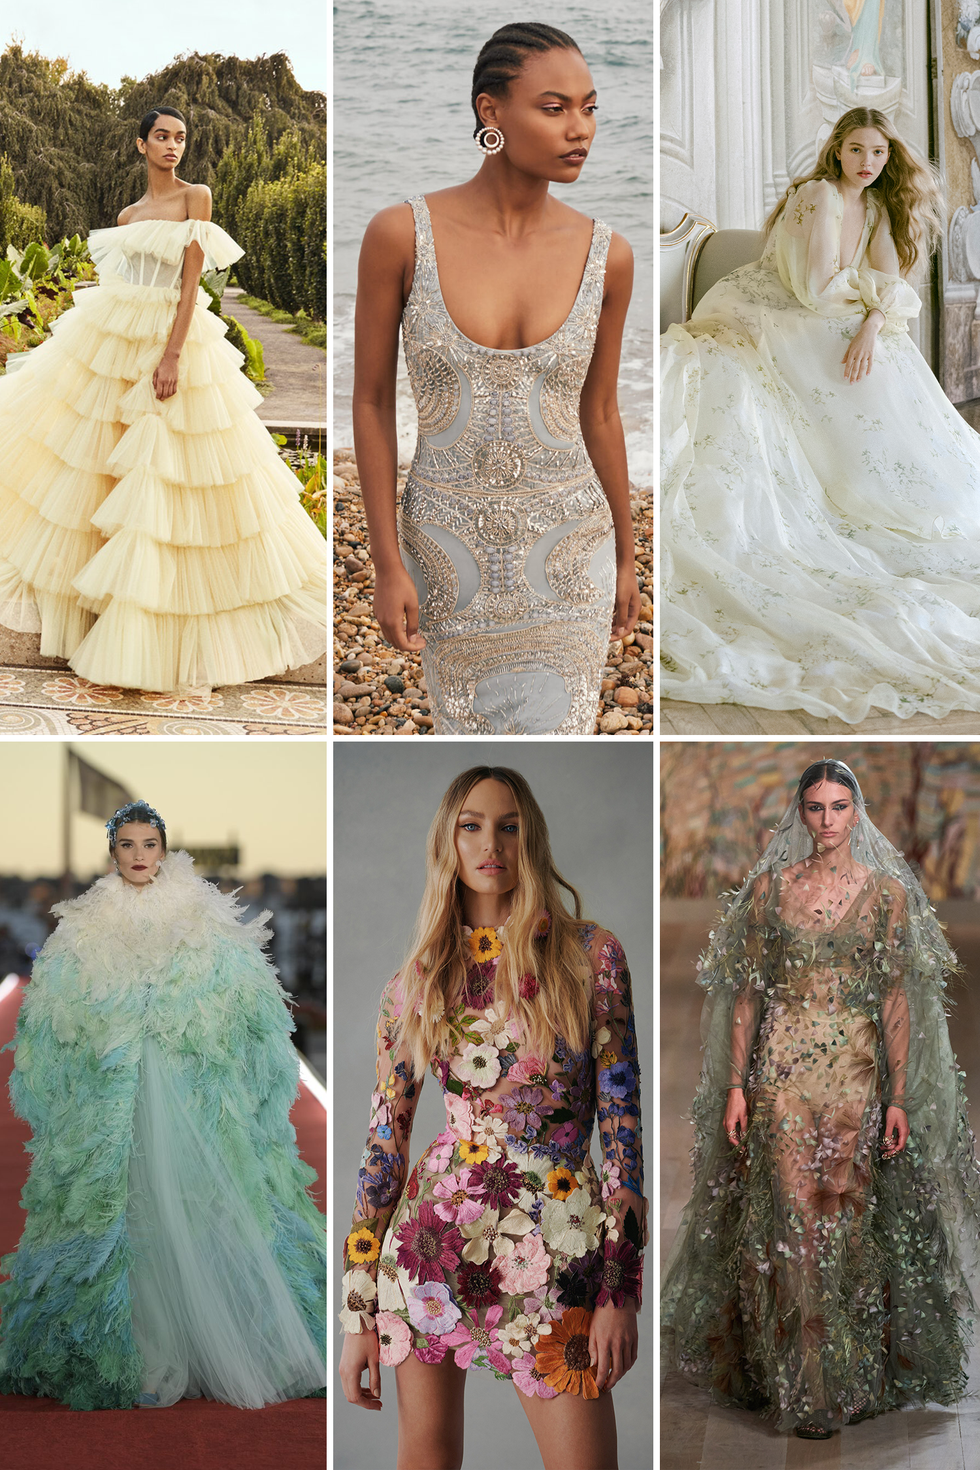 The Top Bridal Fashion Trends to Expect in 2022